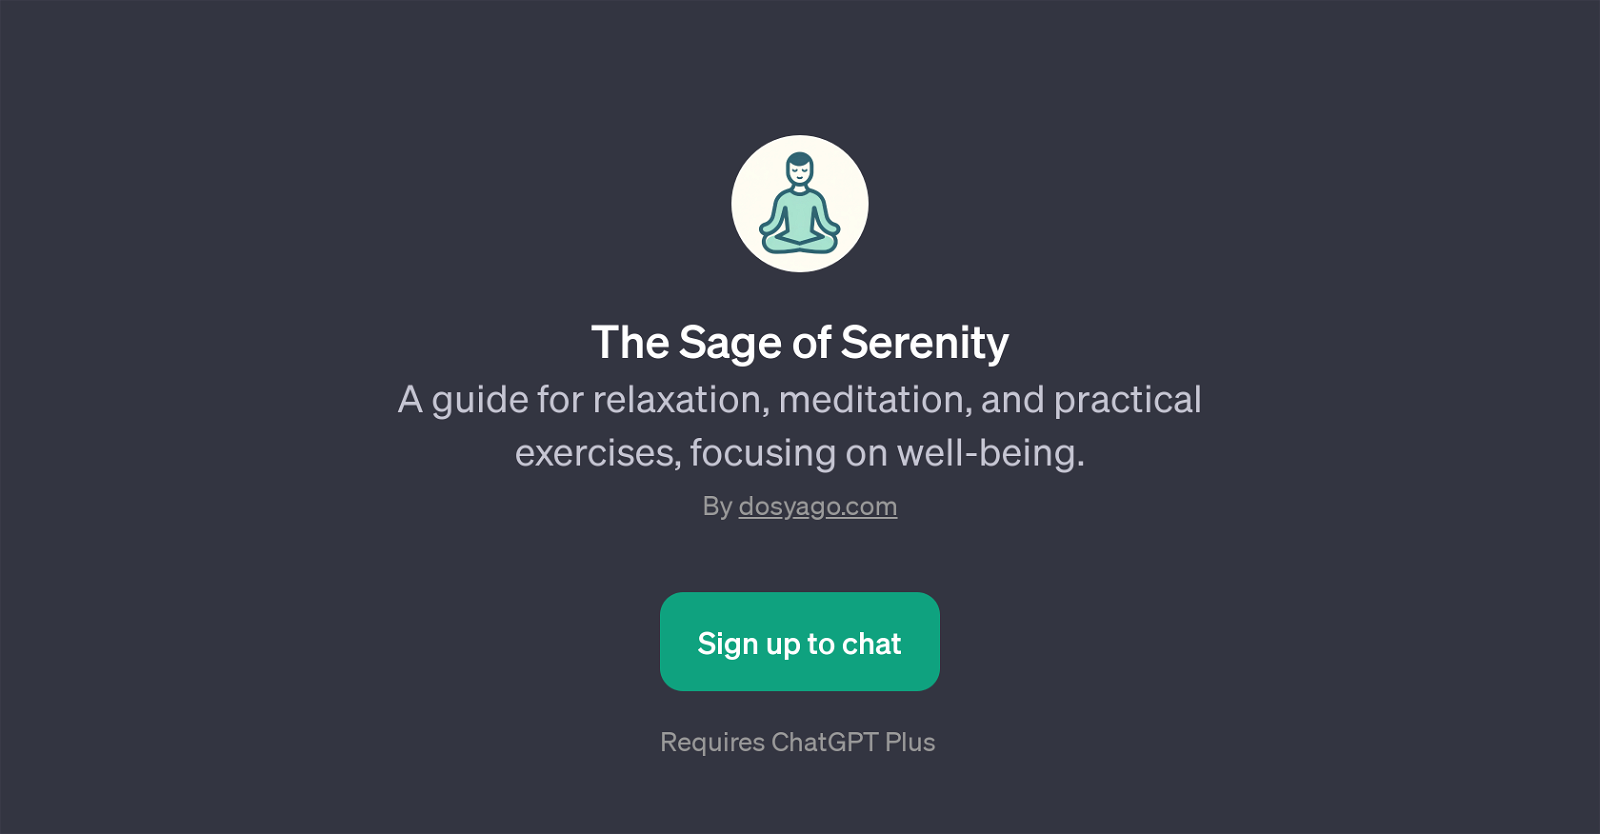 The Sage of Serenity website